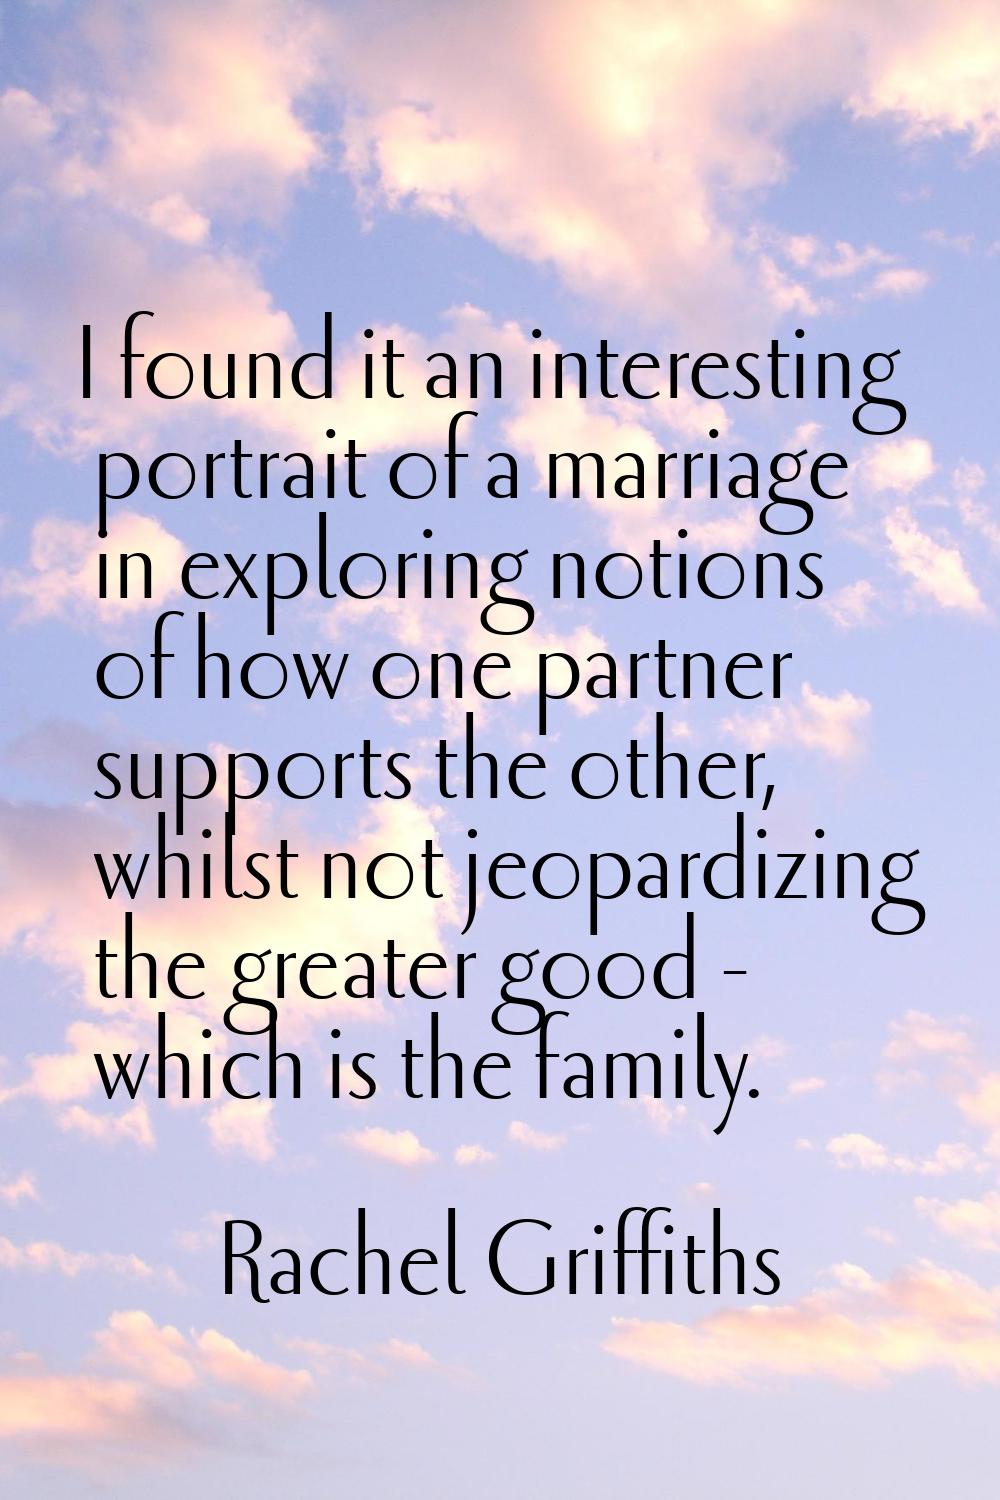 I found it an interesting portrait of a marriage in exploring notions of how one partner supports t